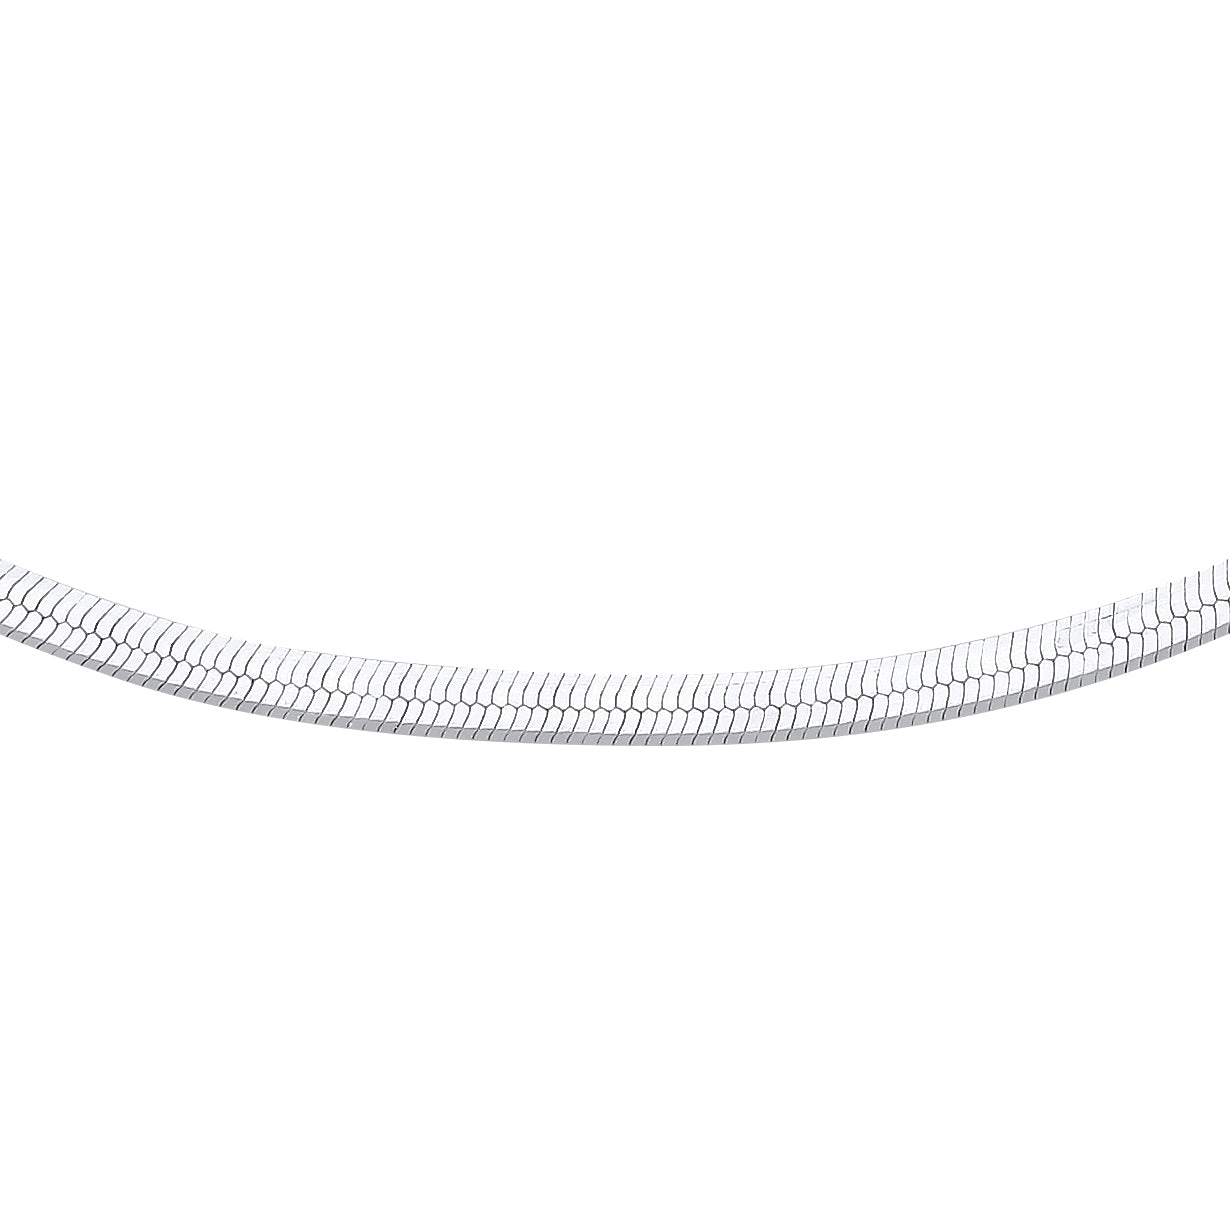 Silver  Flat Herringbone Chain Necklace - GVCL013